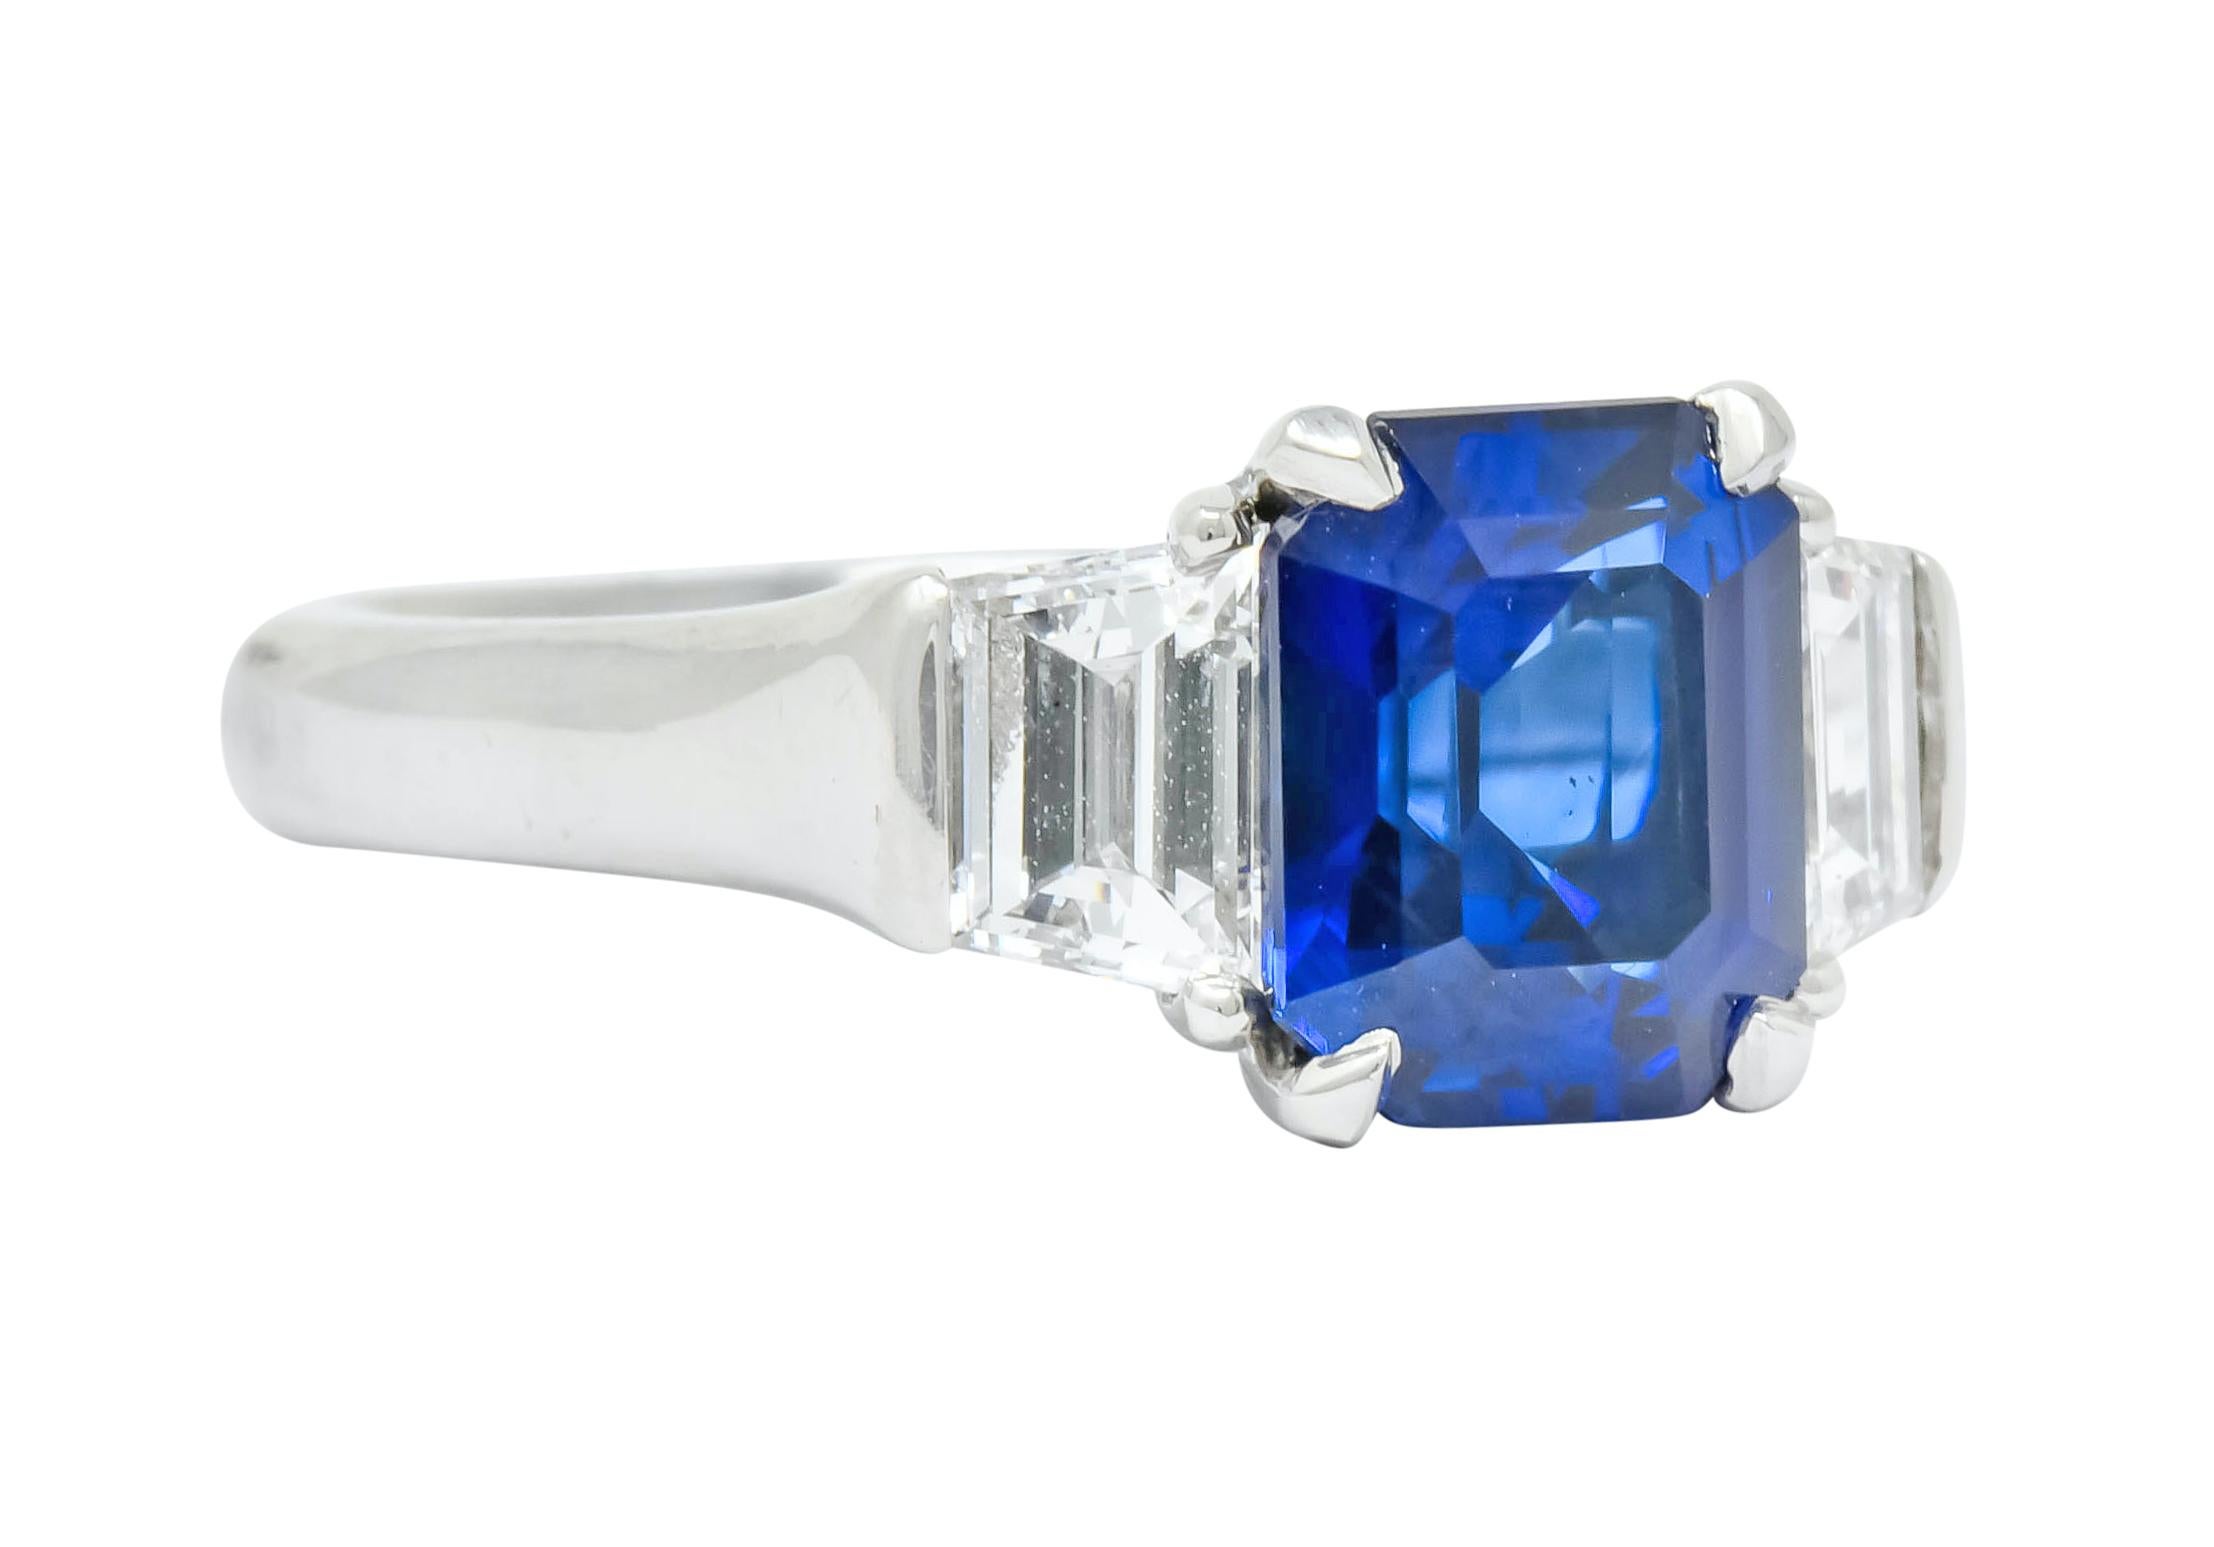 Centering an emerald cut sapphire weighing approximately 3.00 carats, transparent medium-dark royal blue in color

Flanked by two trapezoid cut diamonds weighing in total 1.02 carats; very well-matched G/H color with VVS clarity

Maker's mark and